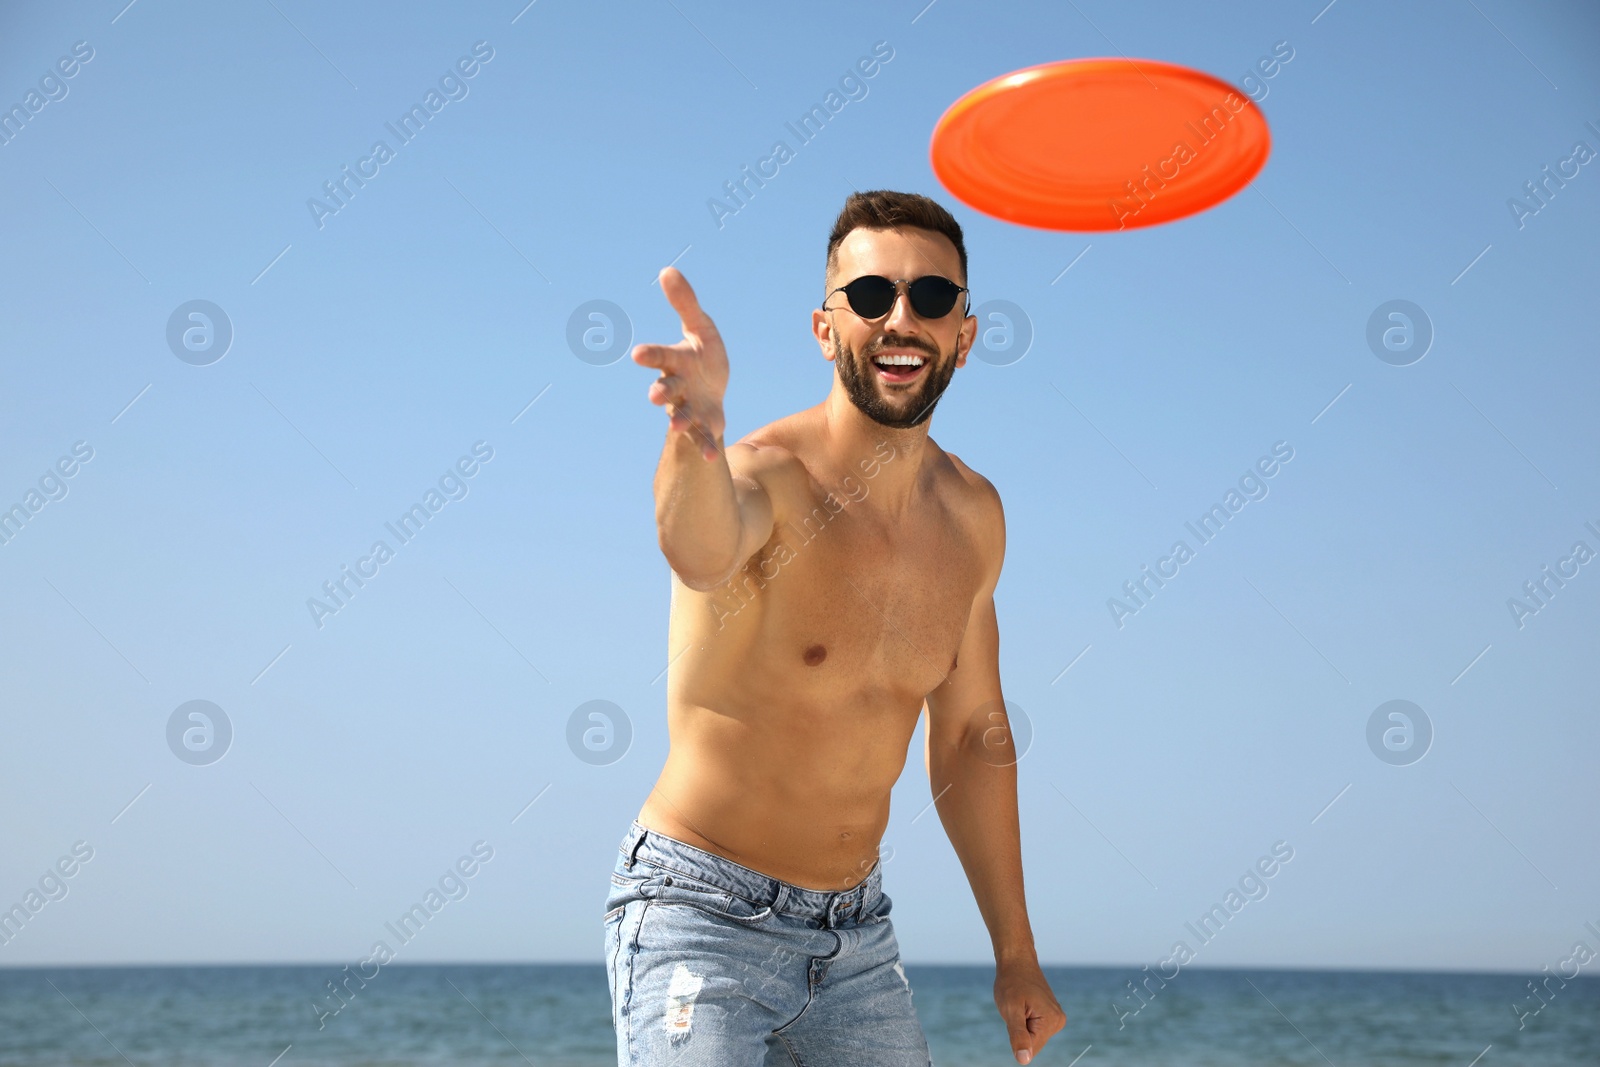 Photo of Happy man throwing flying disk at beach on sunny day